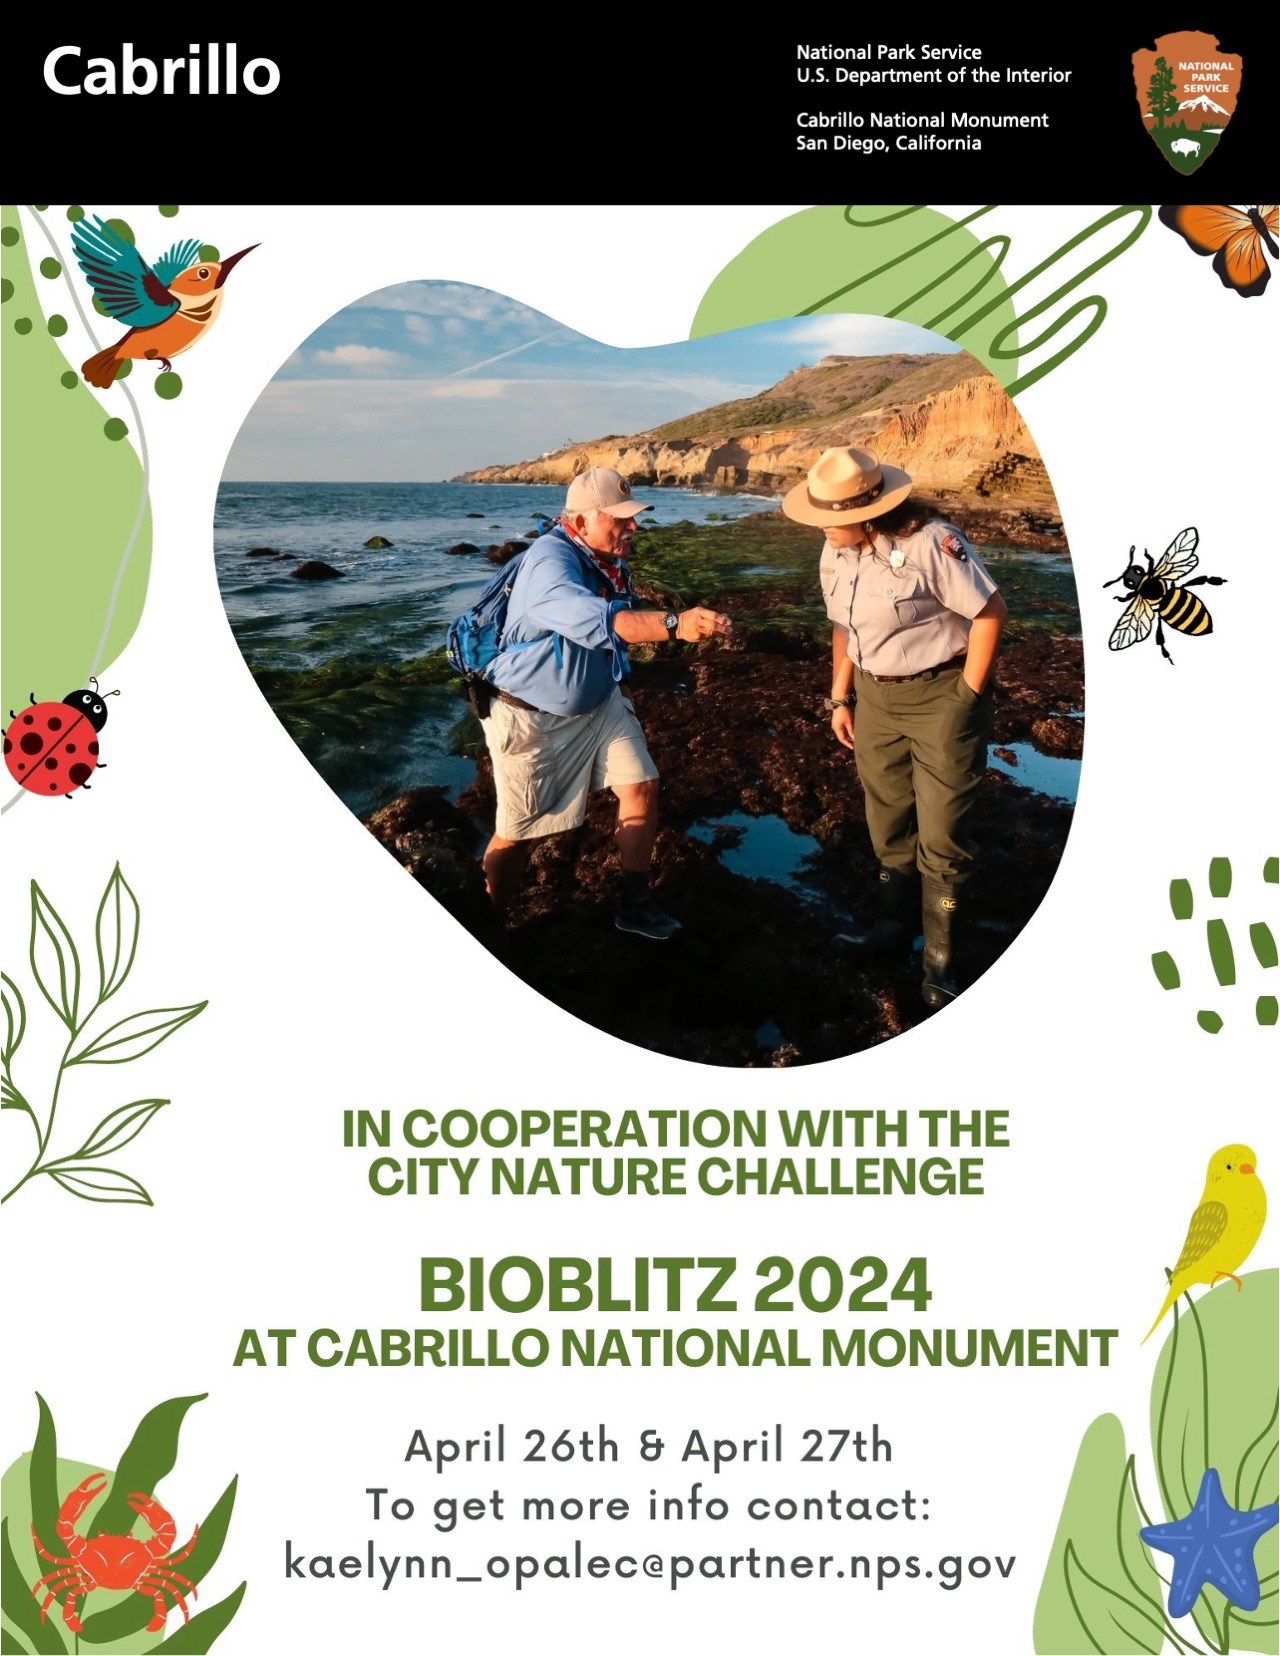 The image is a promotional flyer for an event. It has a dark green background at the top with the text "Cabrillo National Park Service U.S. Department of the Interior Cabrillo National Monument San Diego, California" next to the National Park Service logo